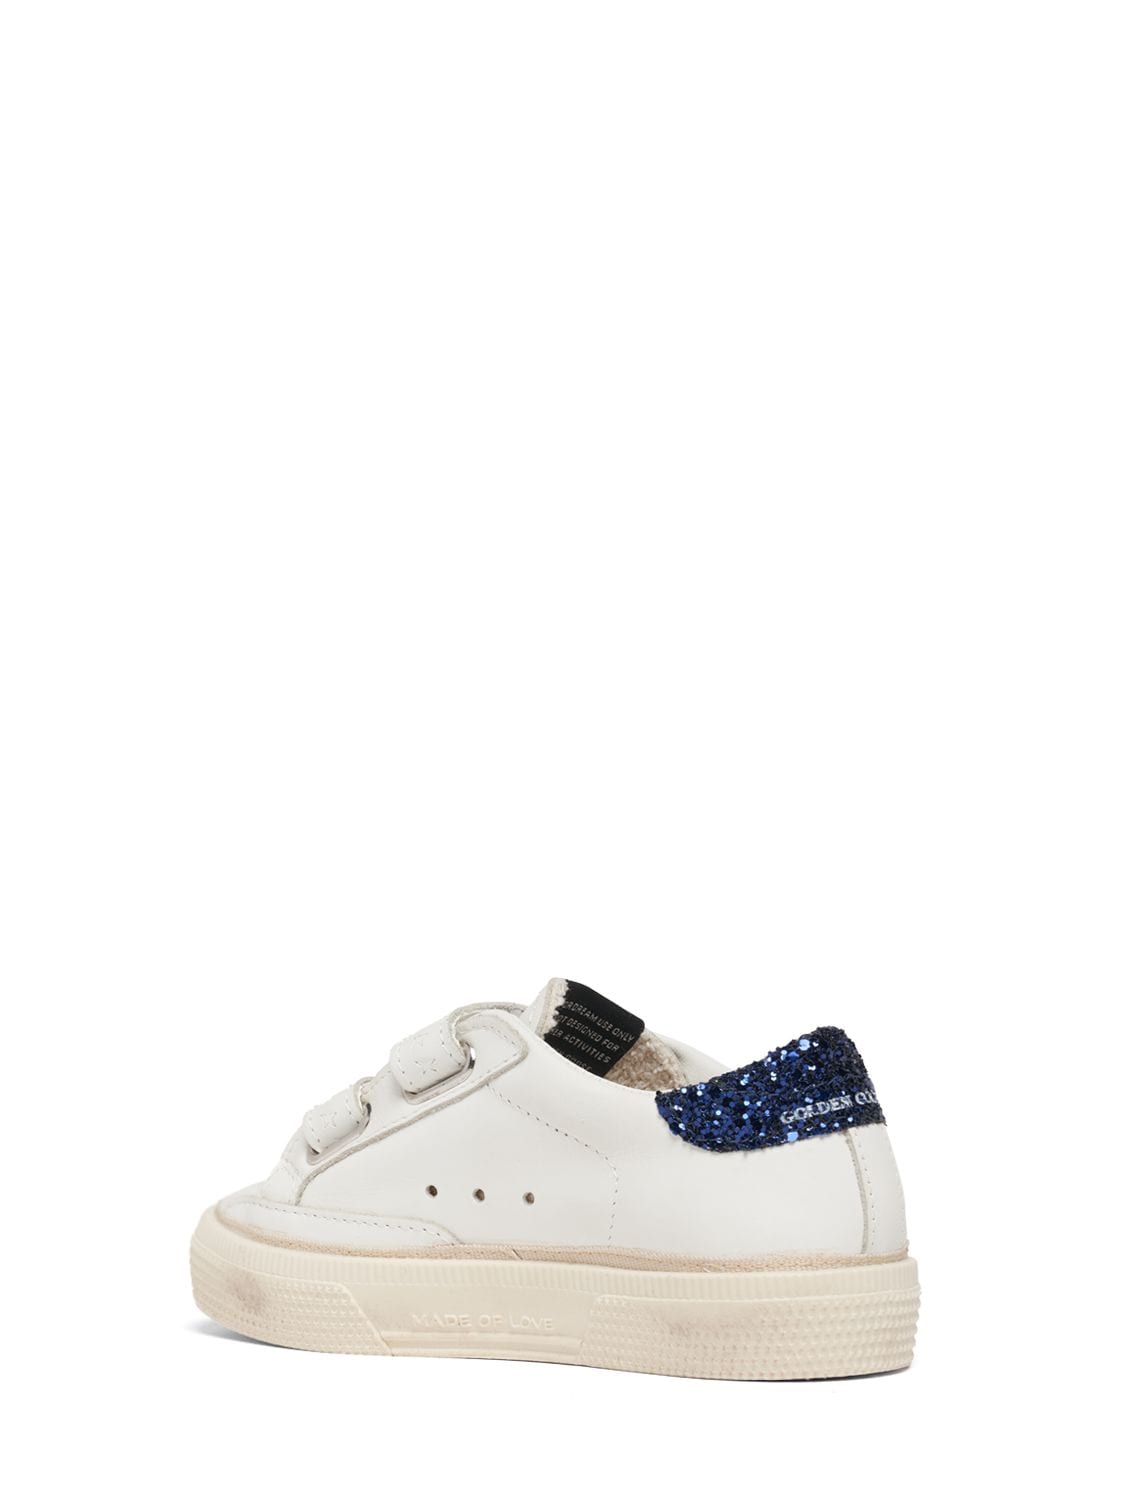 Shop Golden Goose May School Leather Strap Sneakers In White,fucsia